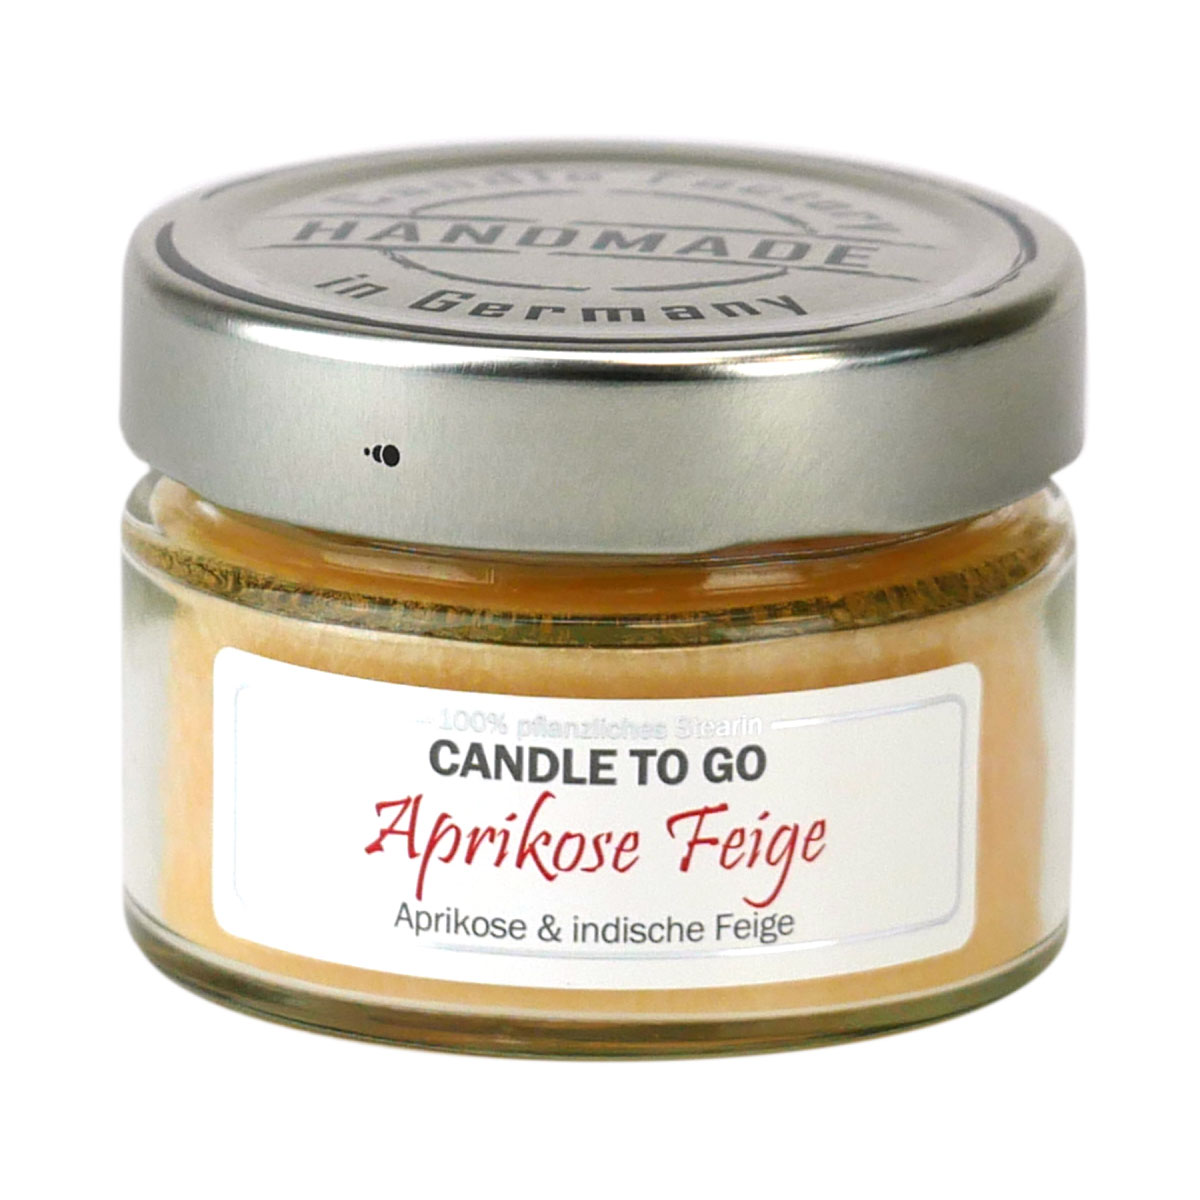 Aprikose Feige - Candle to Go Duftkerze von Candle Factory